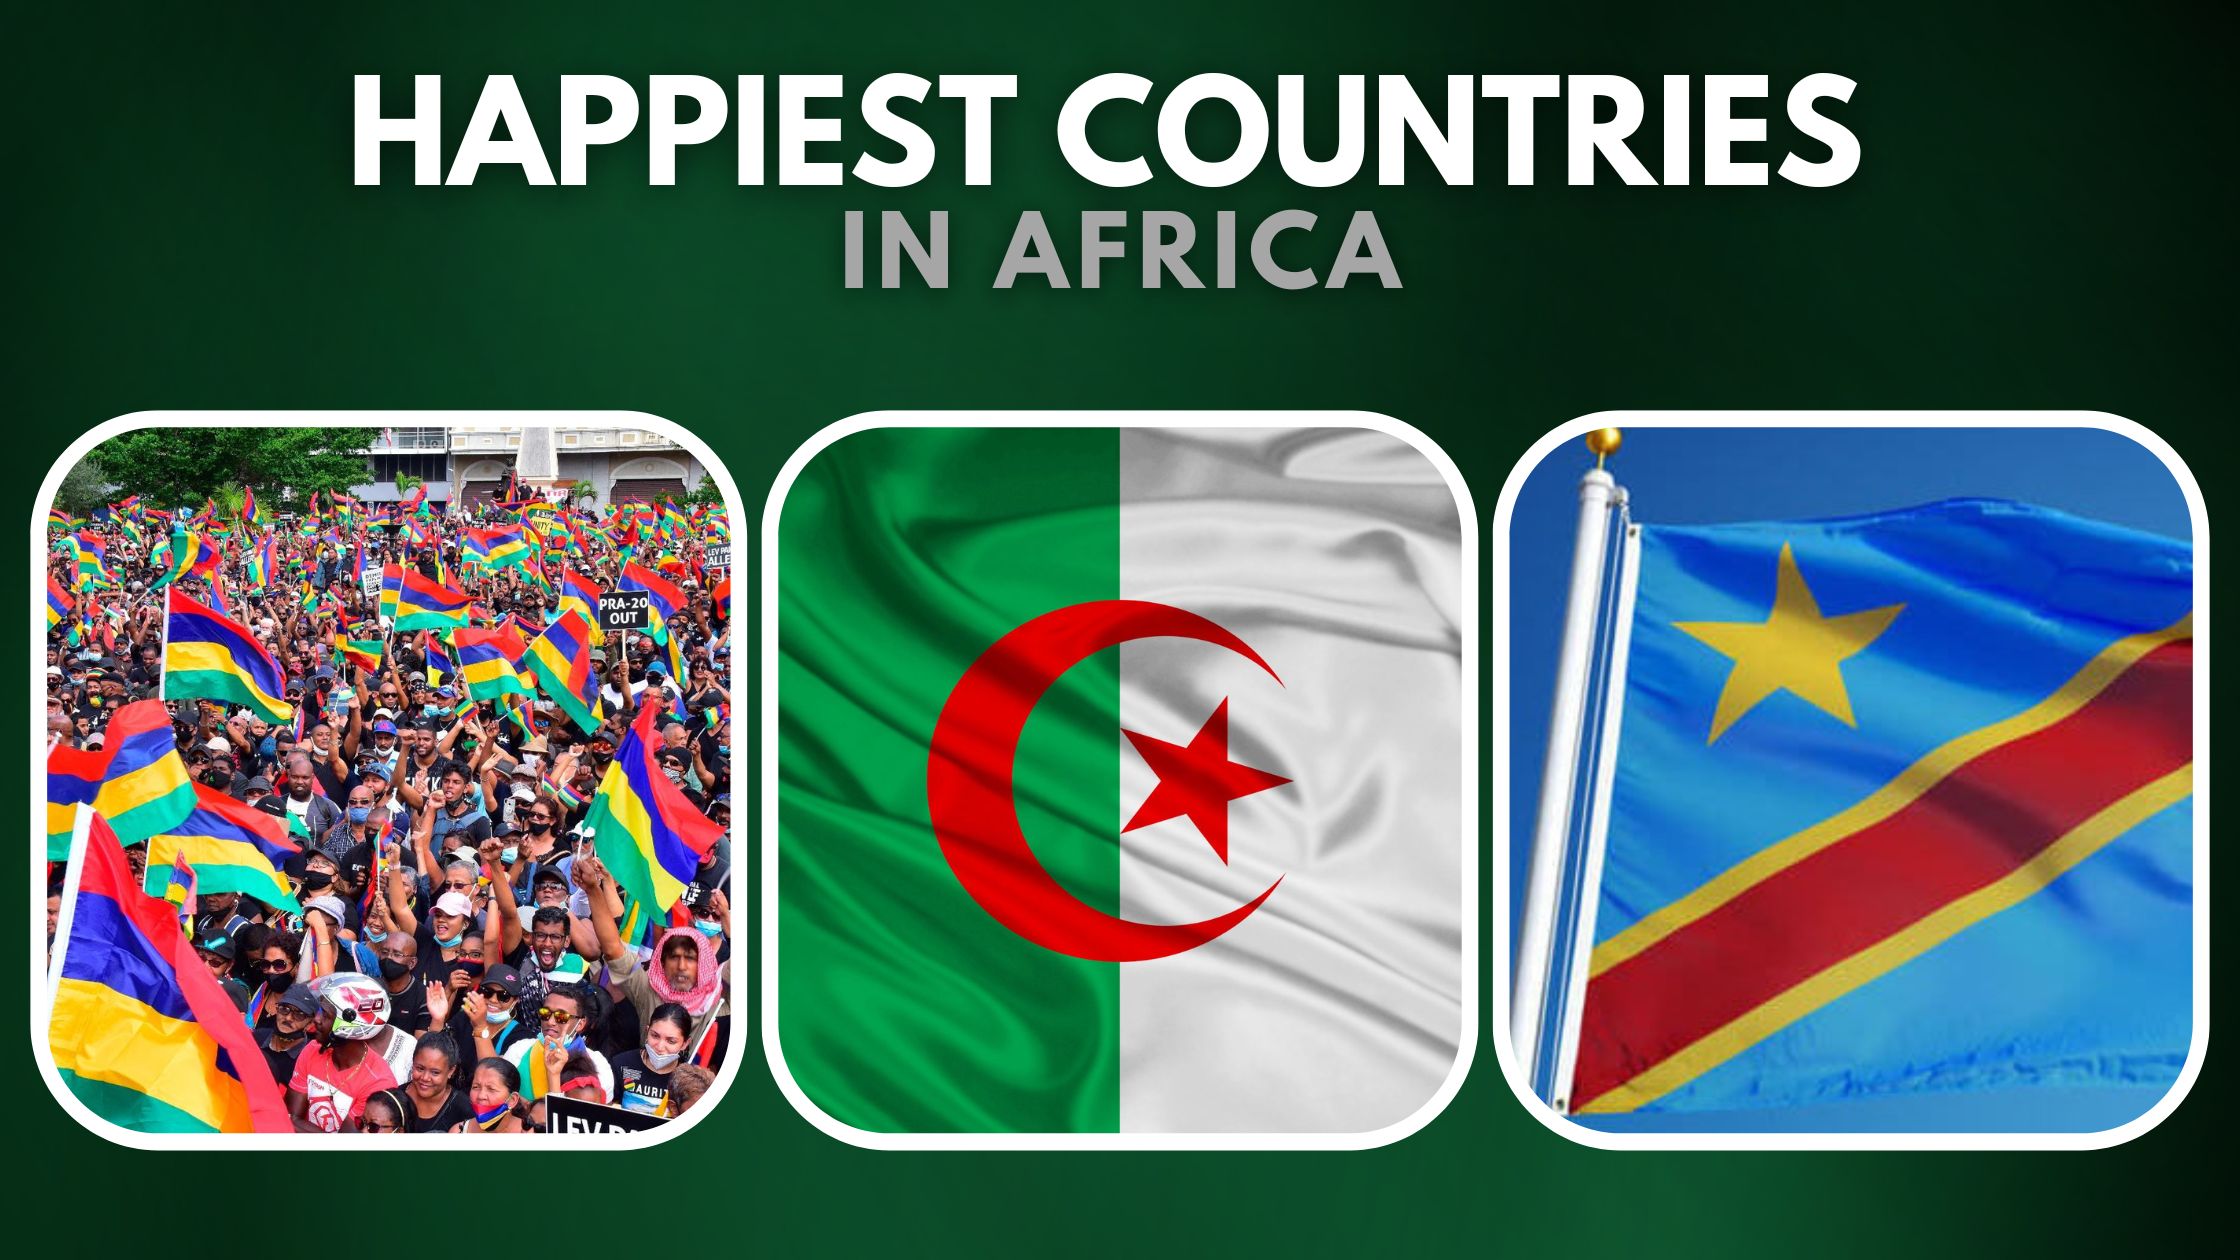 Top 10 Happiest Countries in Africa